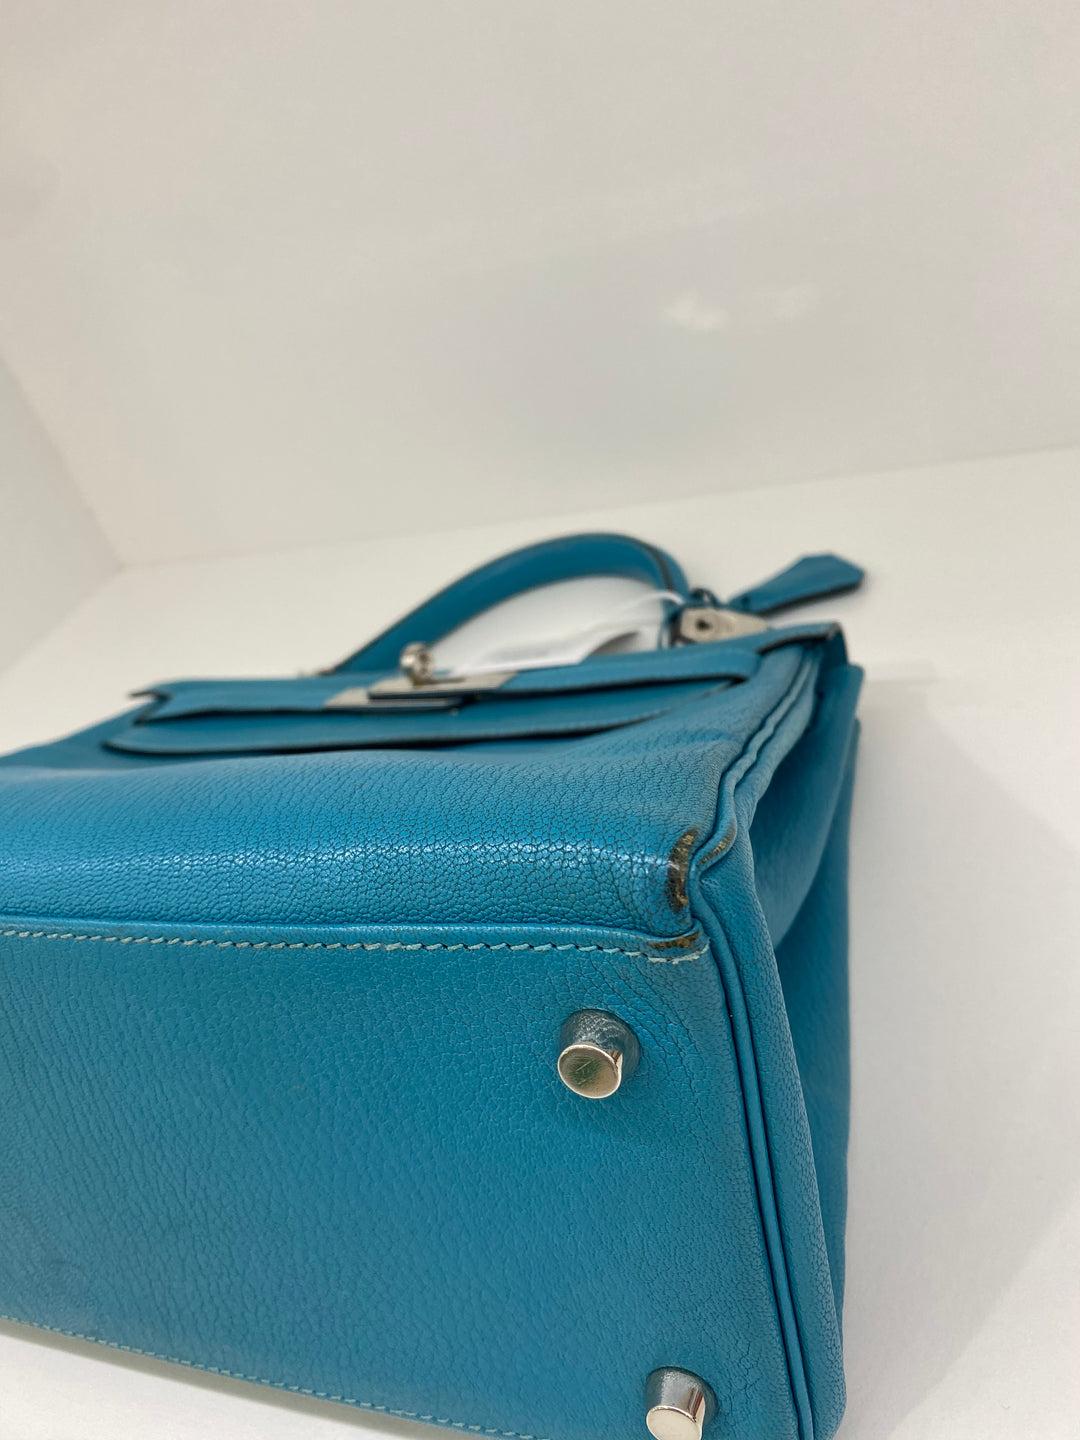 Hermes Kelly Blue Jean 28 PHW In Fair Condition For Sale In Double Bay, AU